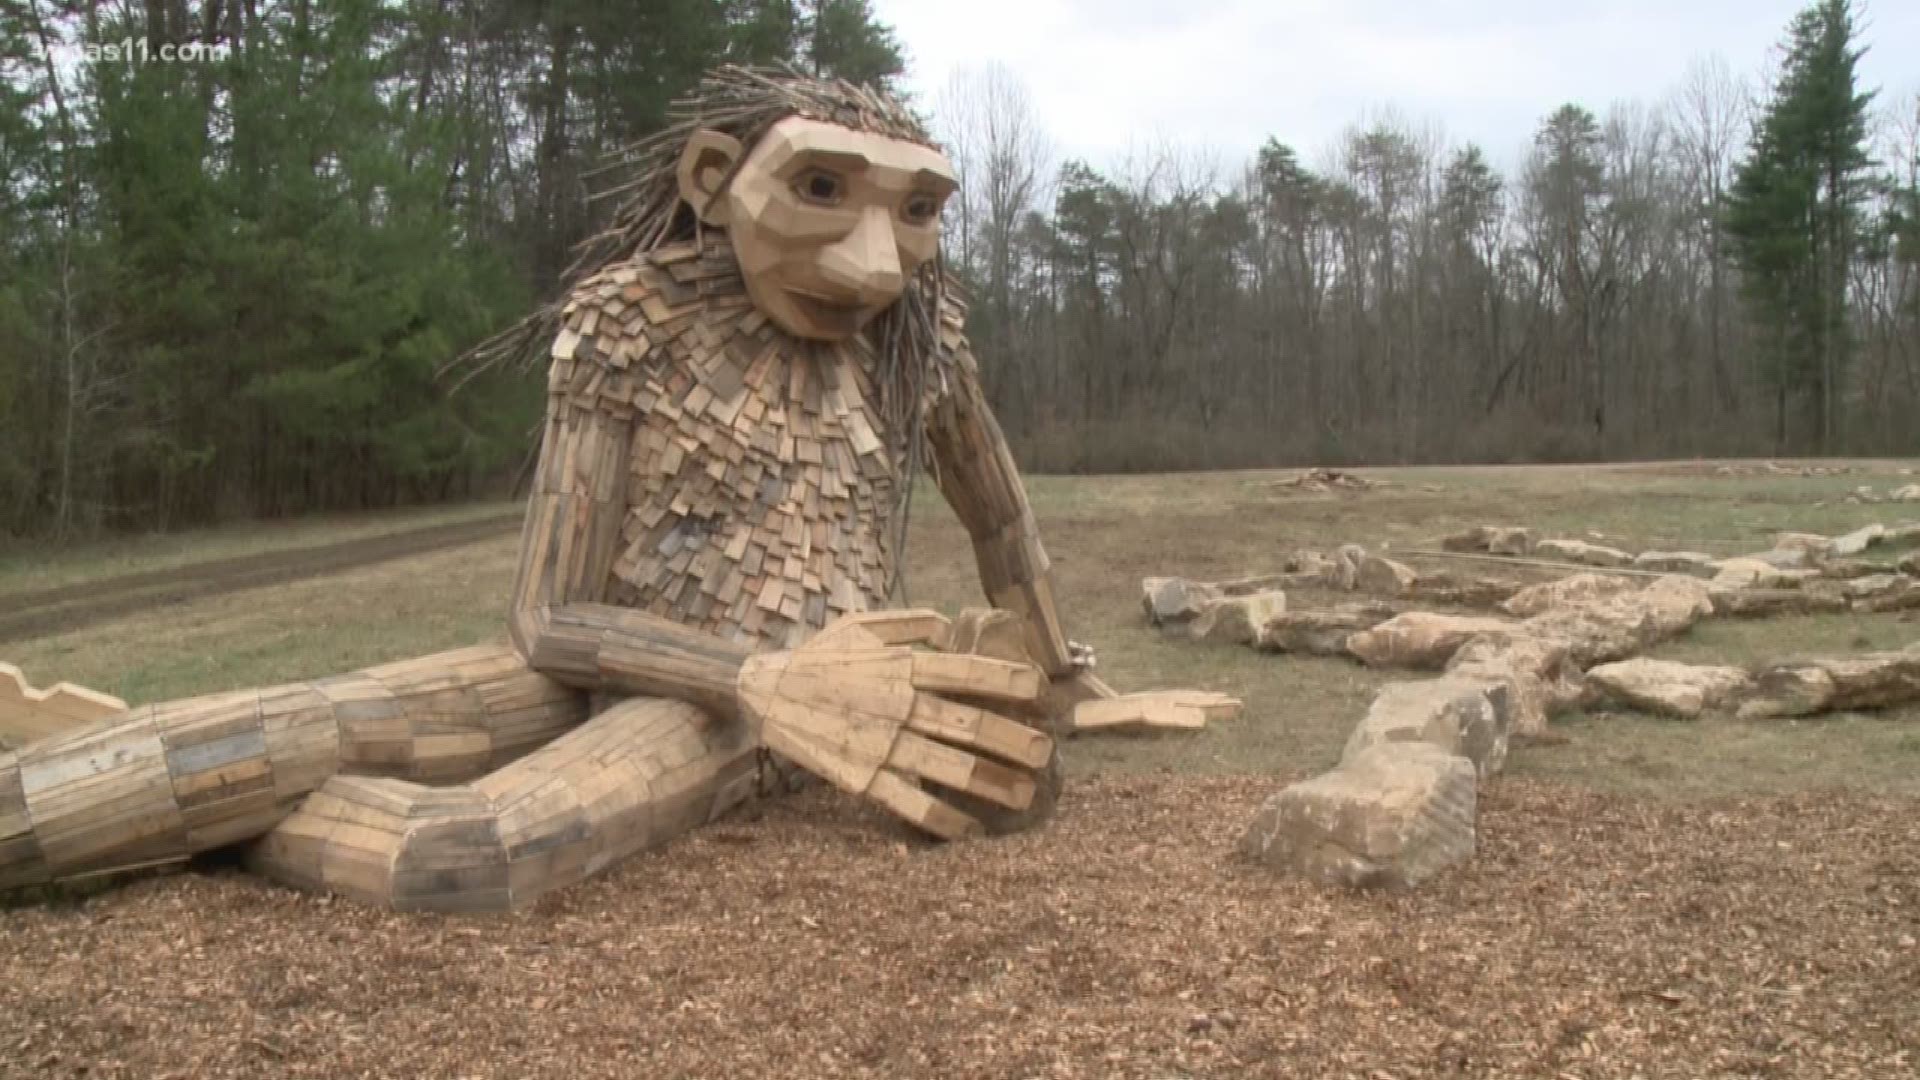 After several pieces from one of the Bernheim troll have gone missing, the artists is asking the public to leave the art for everyone to enjoy.